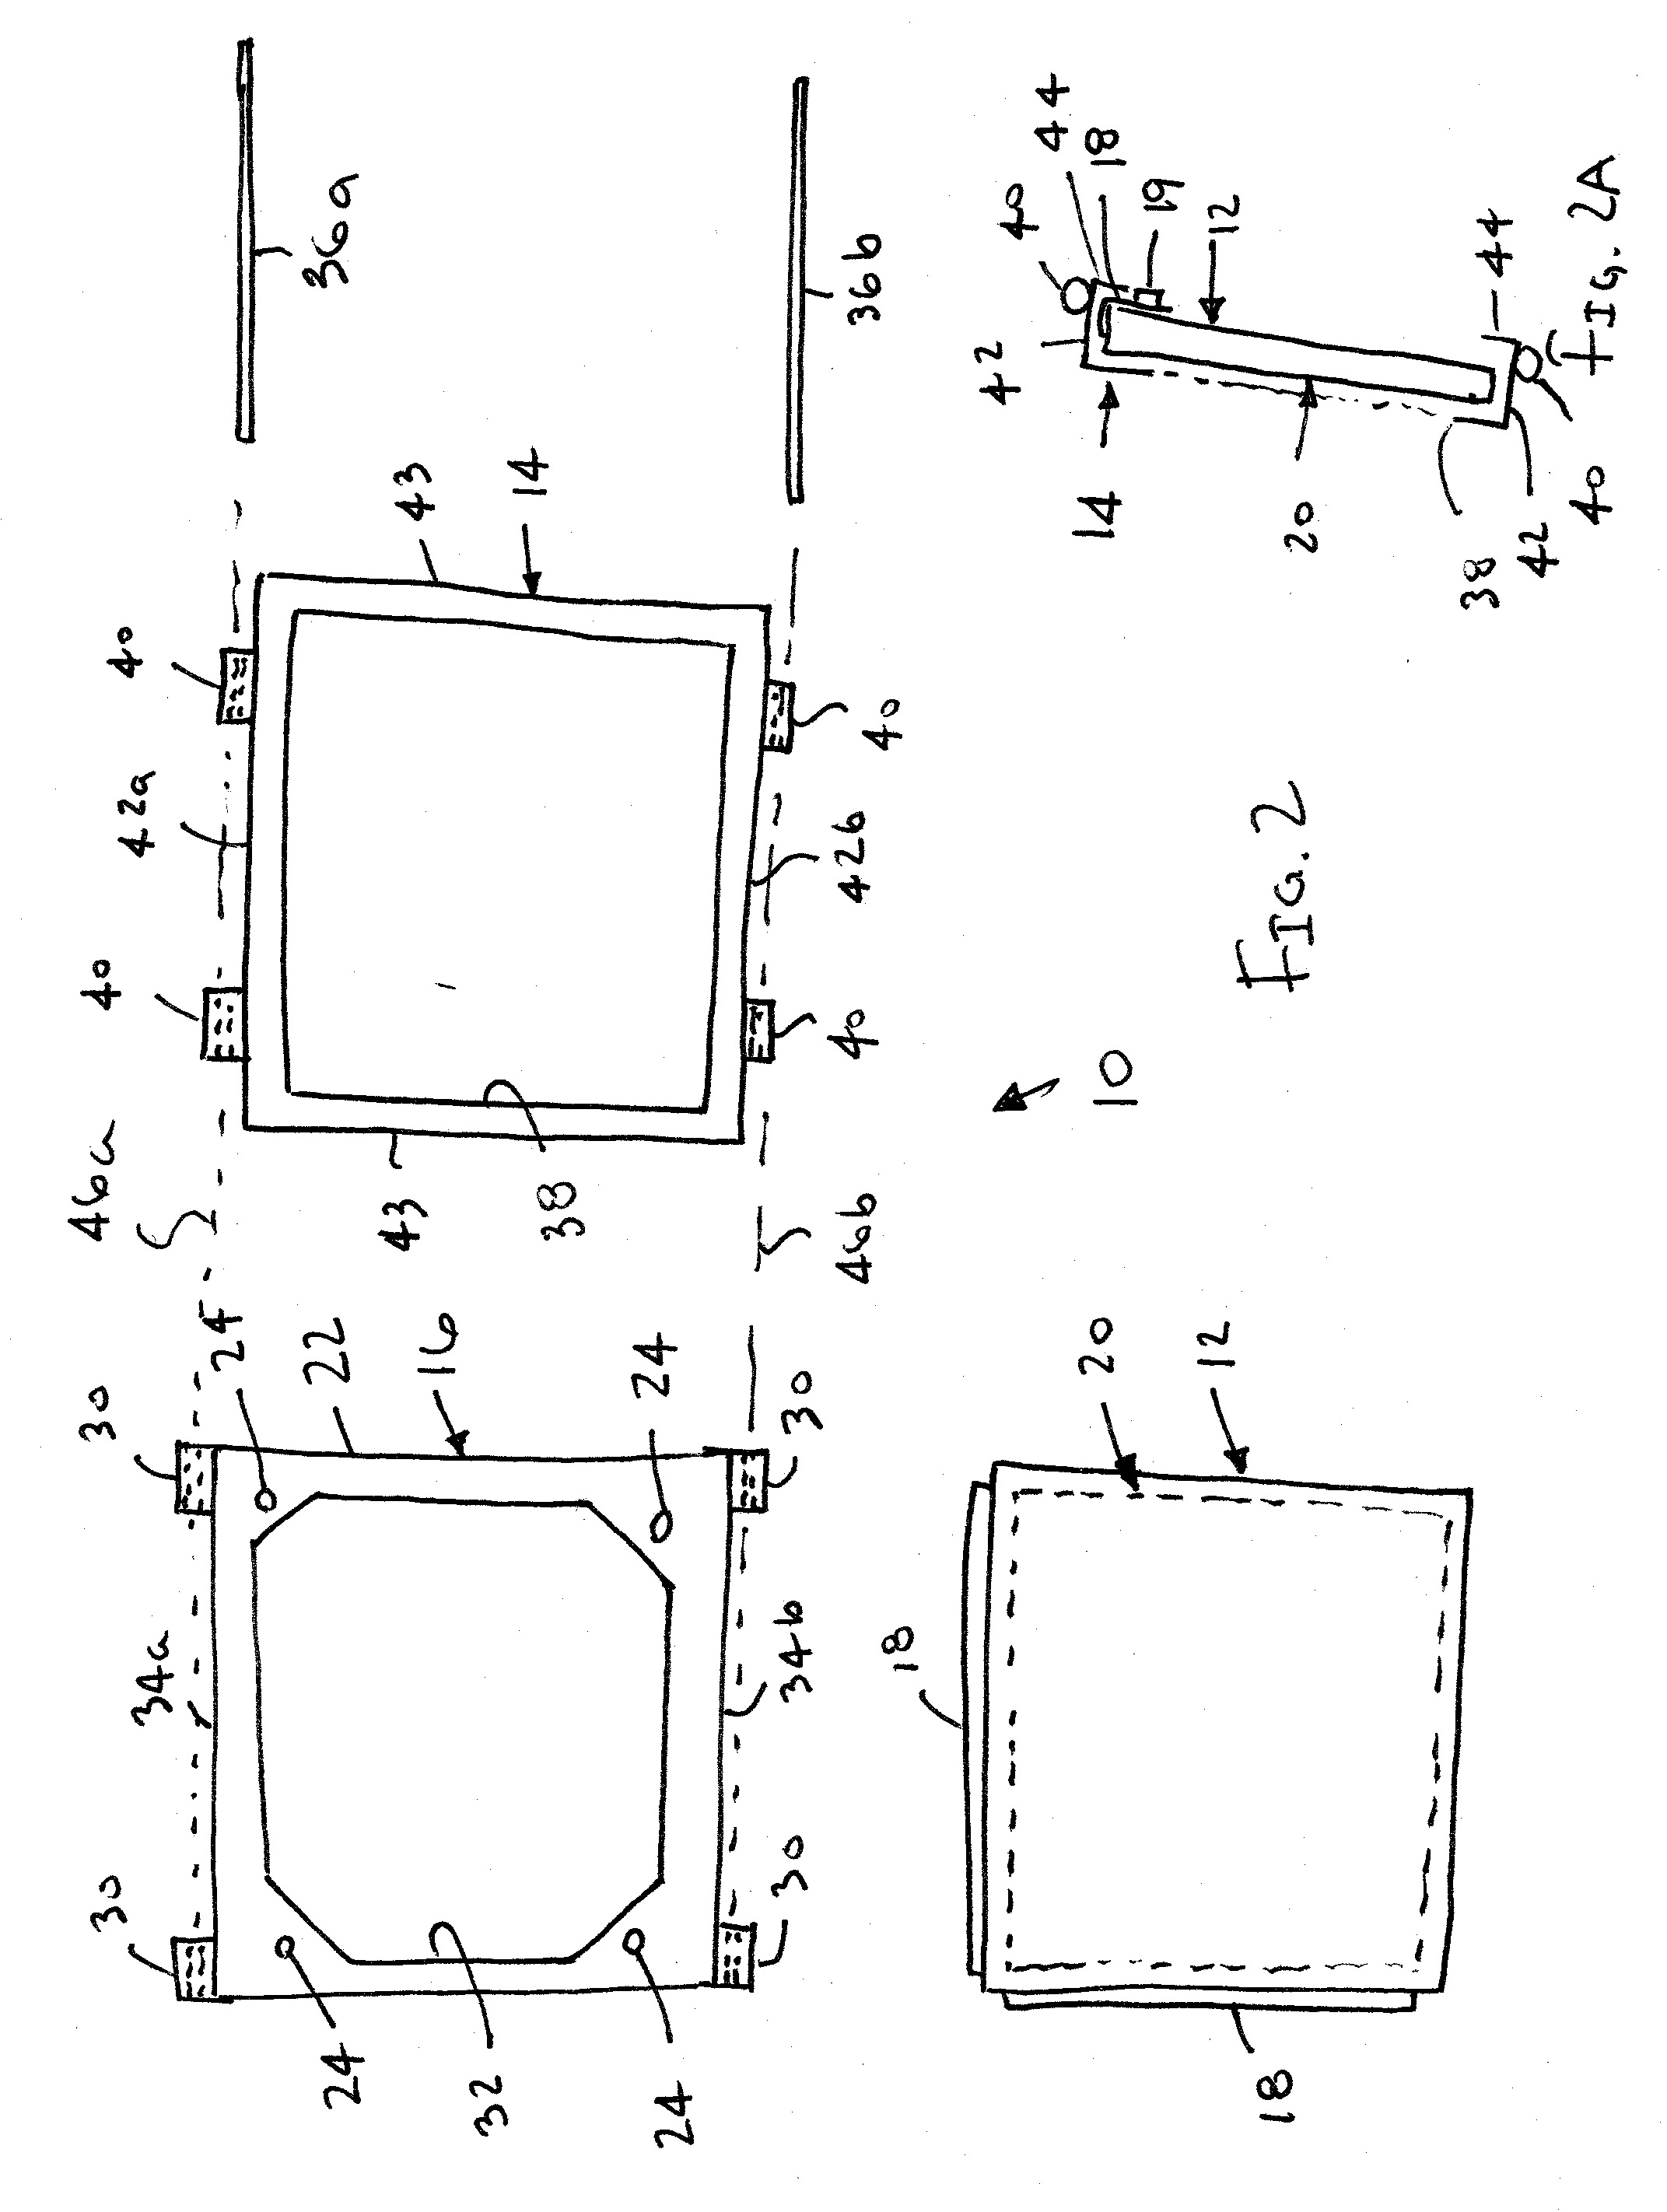 Apparatus and methods for mounting flat panel displays